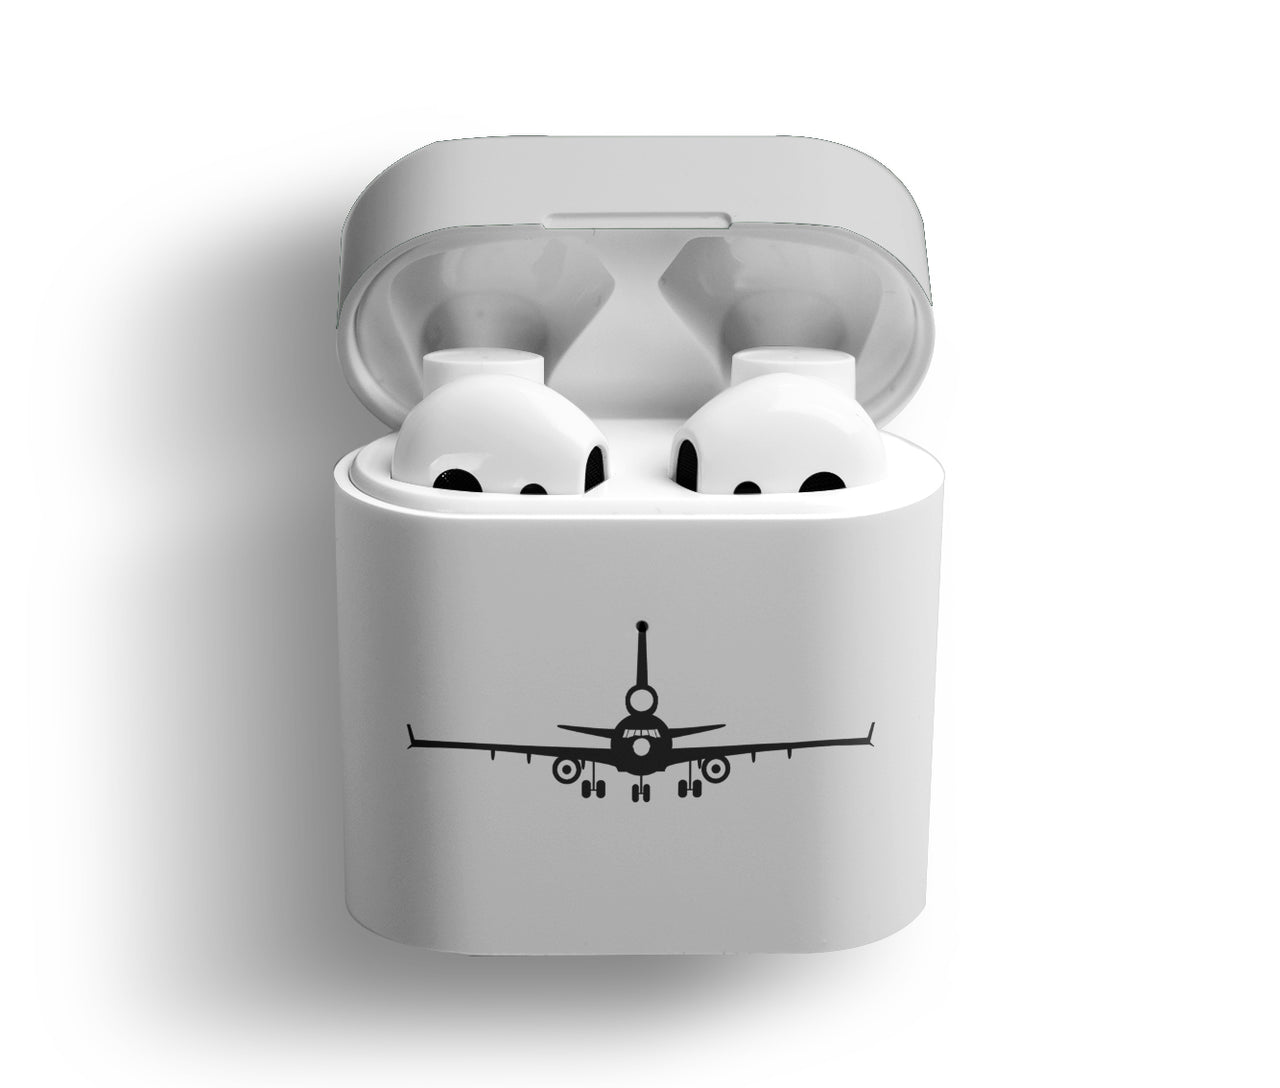 McDonnell Douglas MD-11 Silhouette Plane Designed AirPods Cases